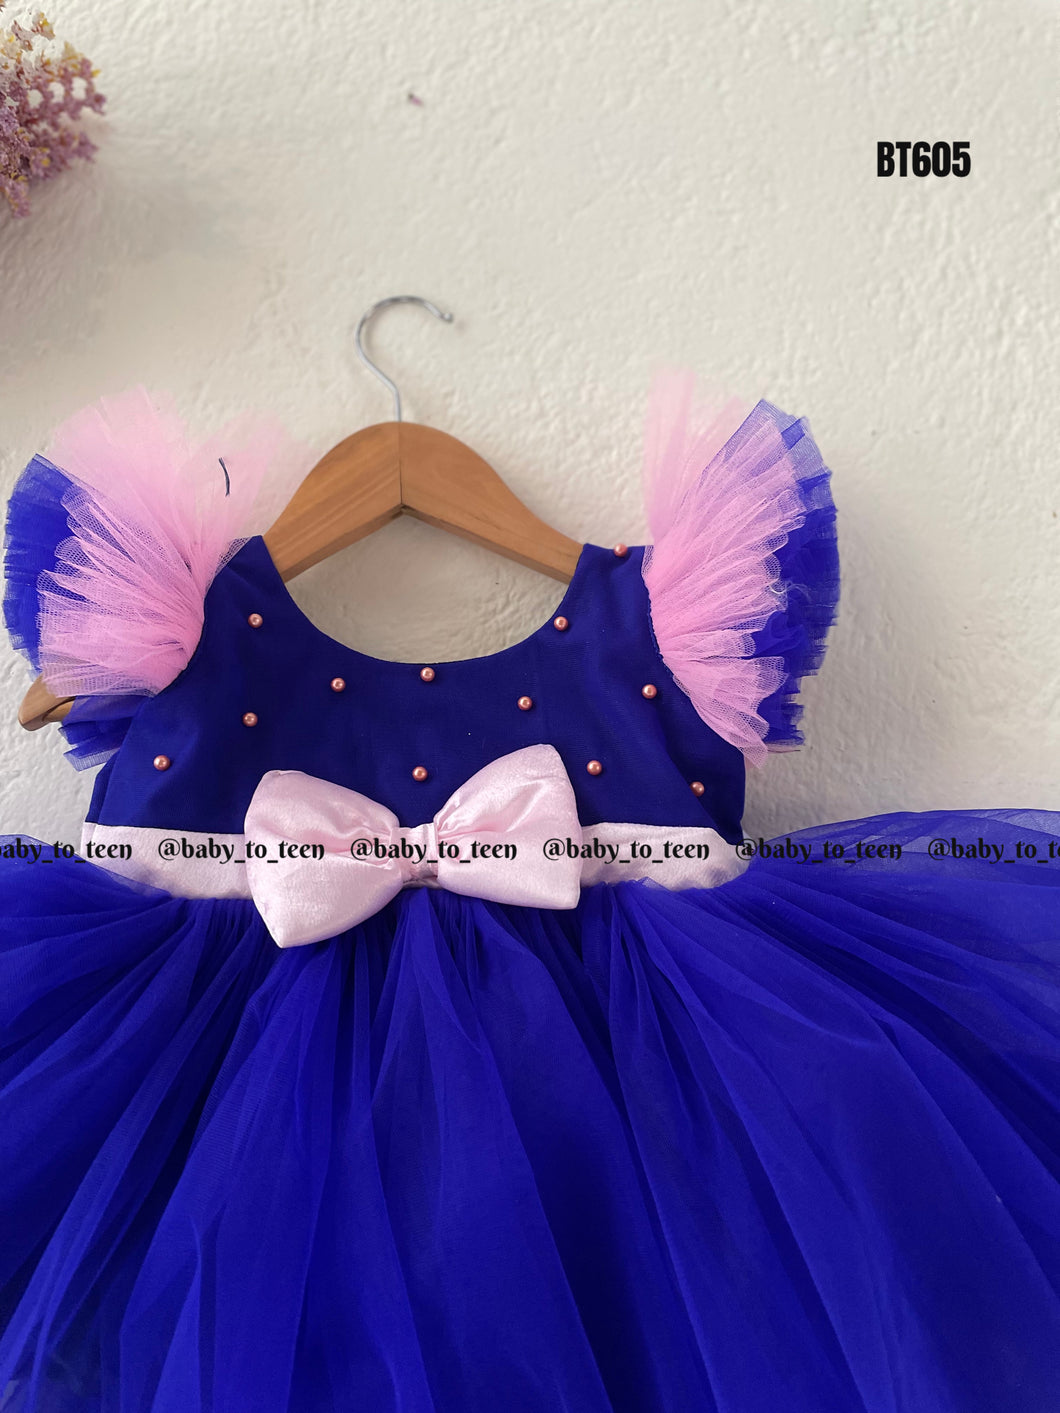 BT605 Sapphire Whispers: Enchanting Blue Feather Dress